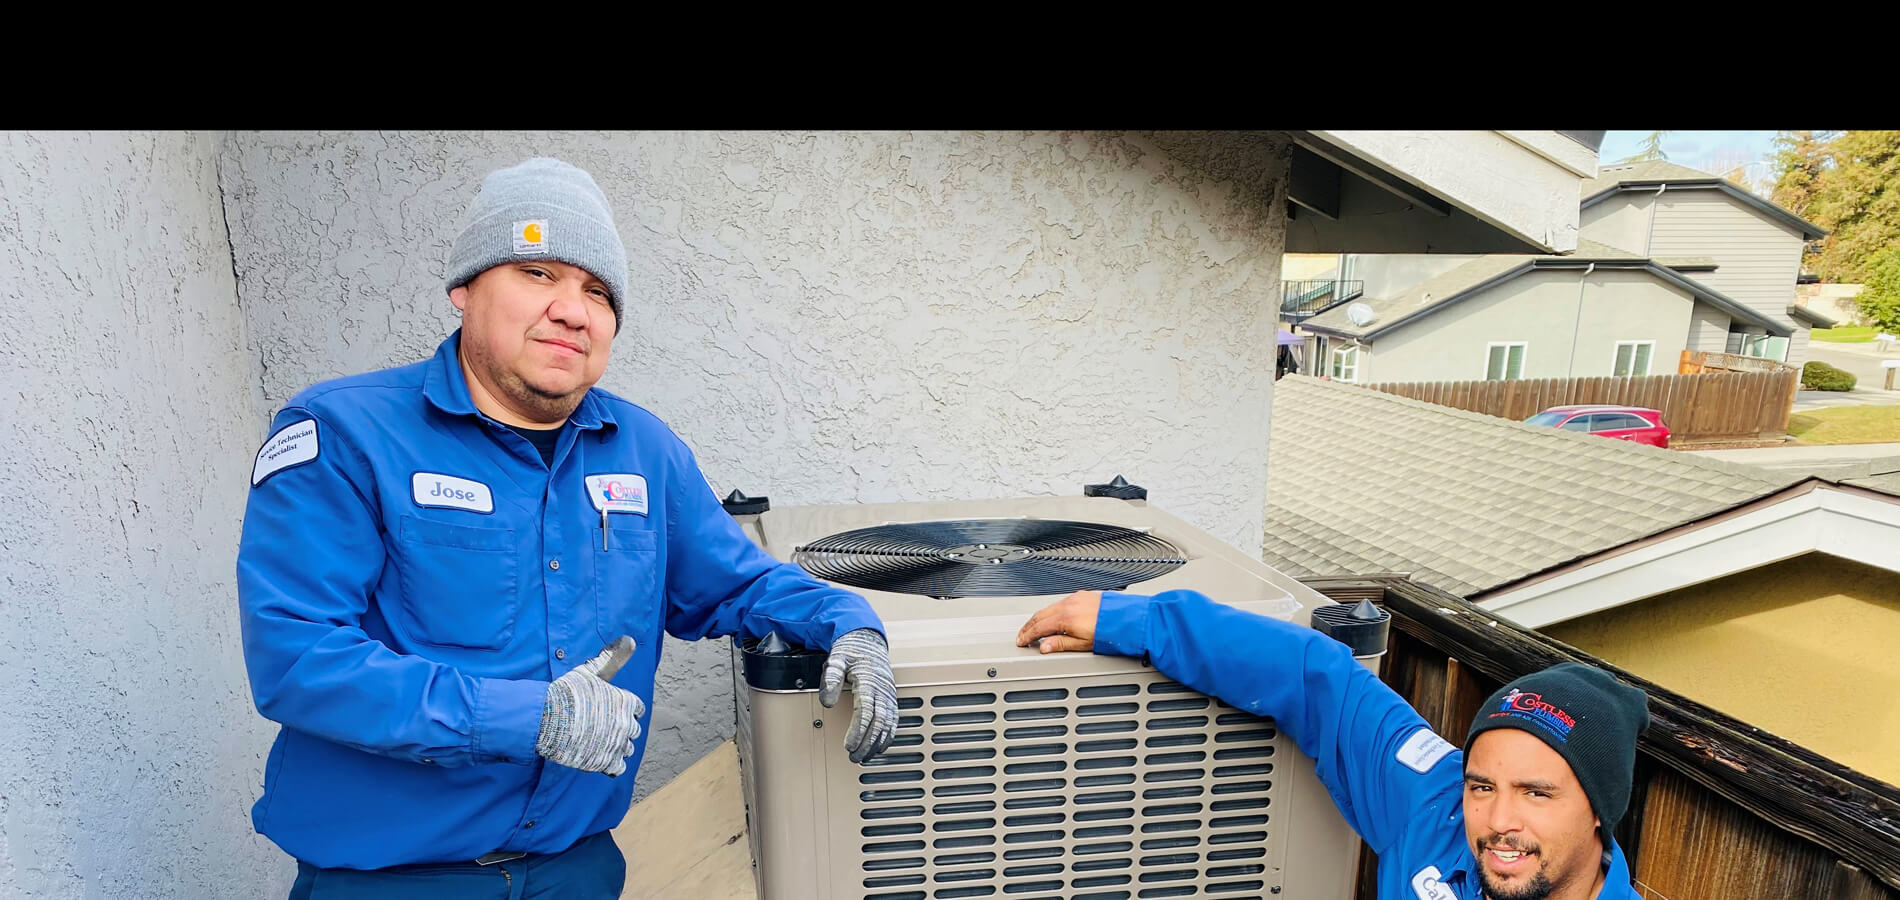 Costless Plumbing workers giving thumbs up next to AC unit